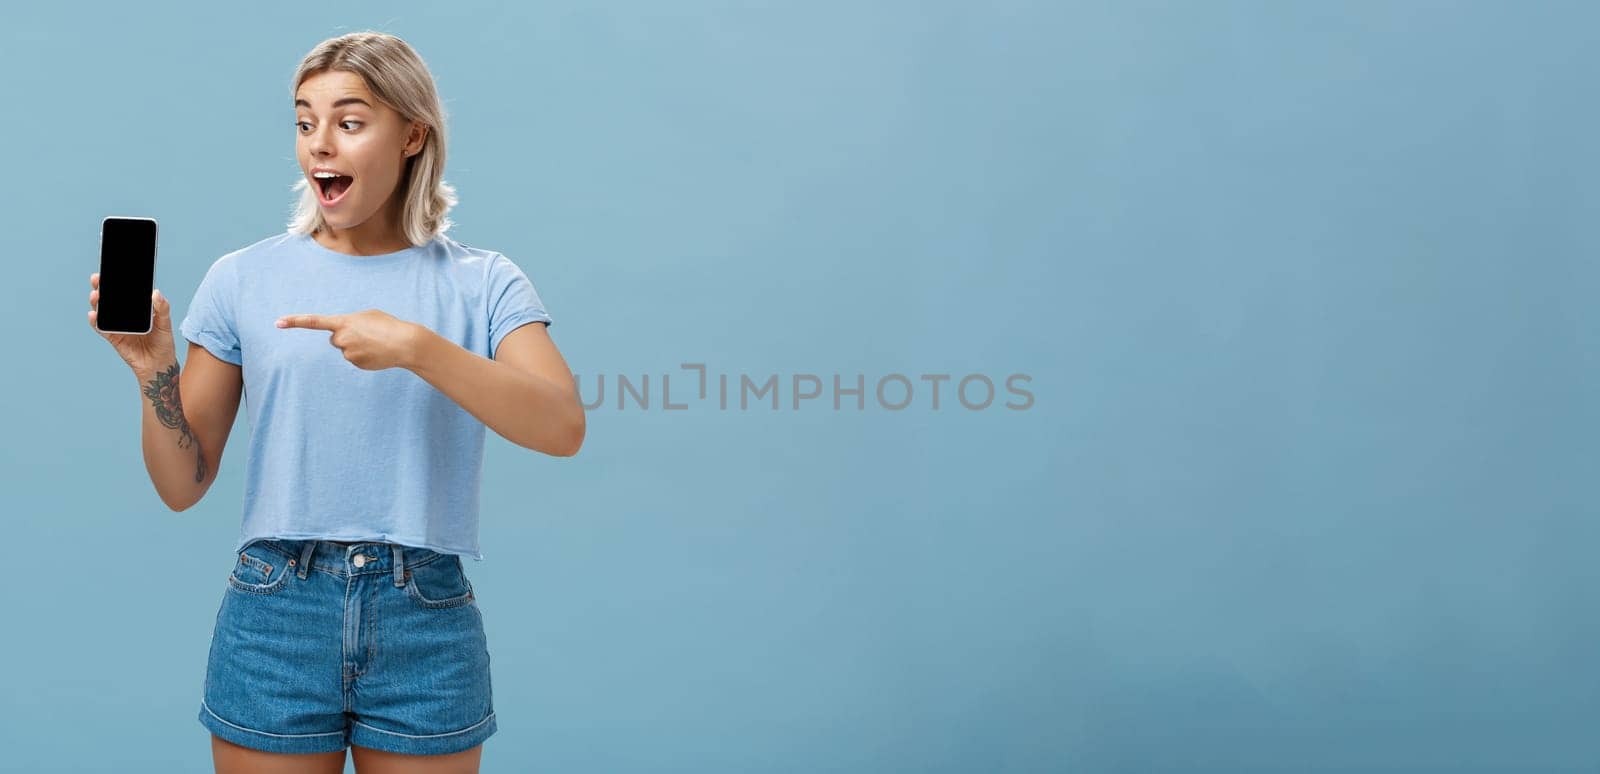 Look at this awesome smartphone. Impressed enthusiastic good-looking female blonde with cool tattoo on arm dropping jaw from thrill and excitement pointing at device screen over blue background by Benzoix